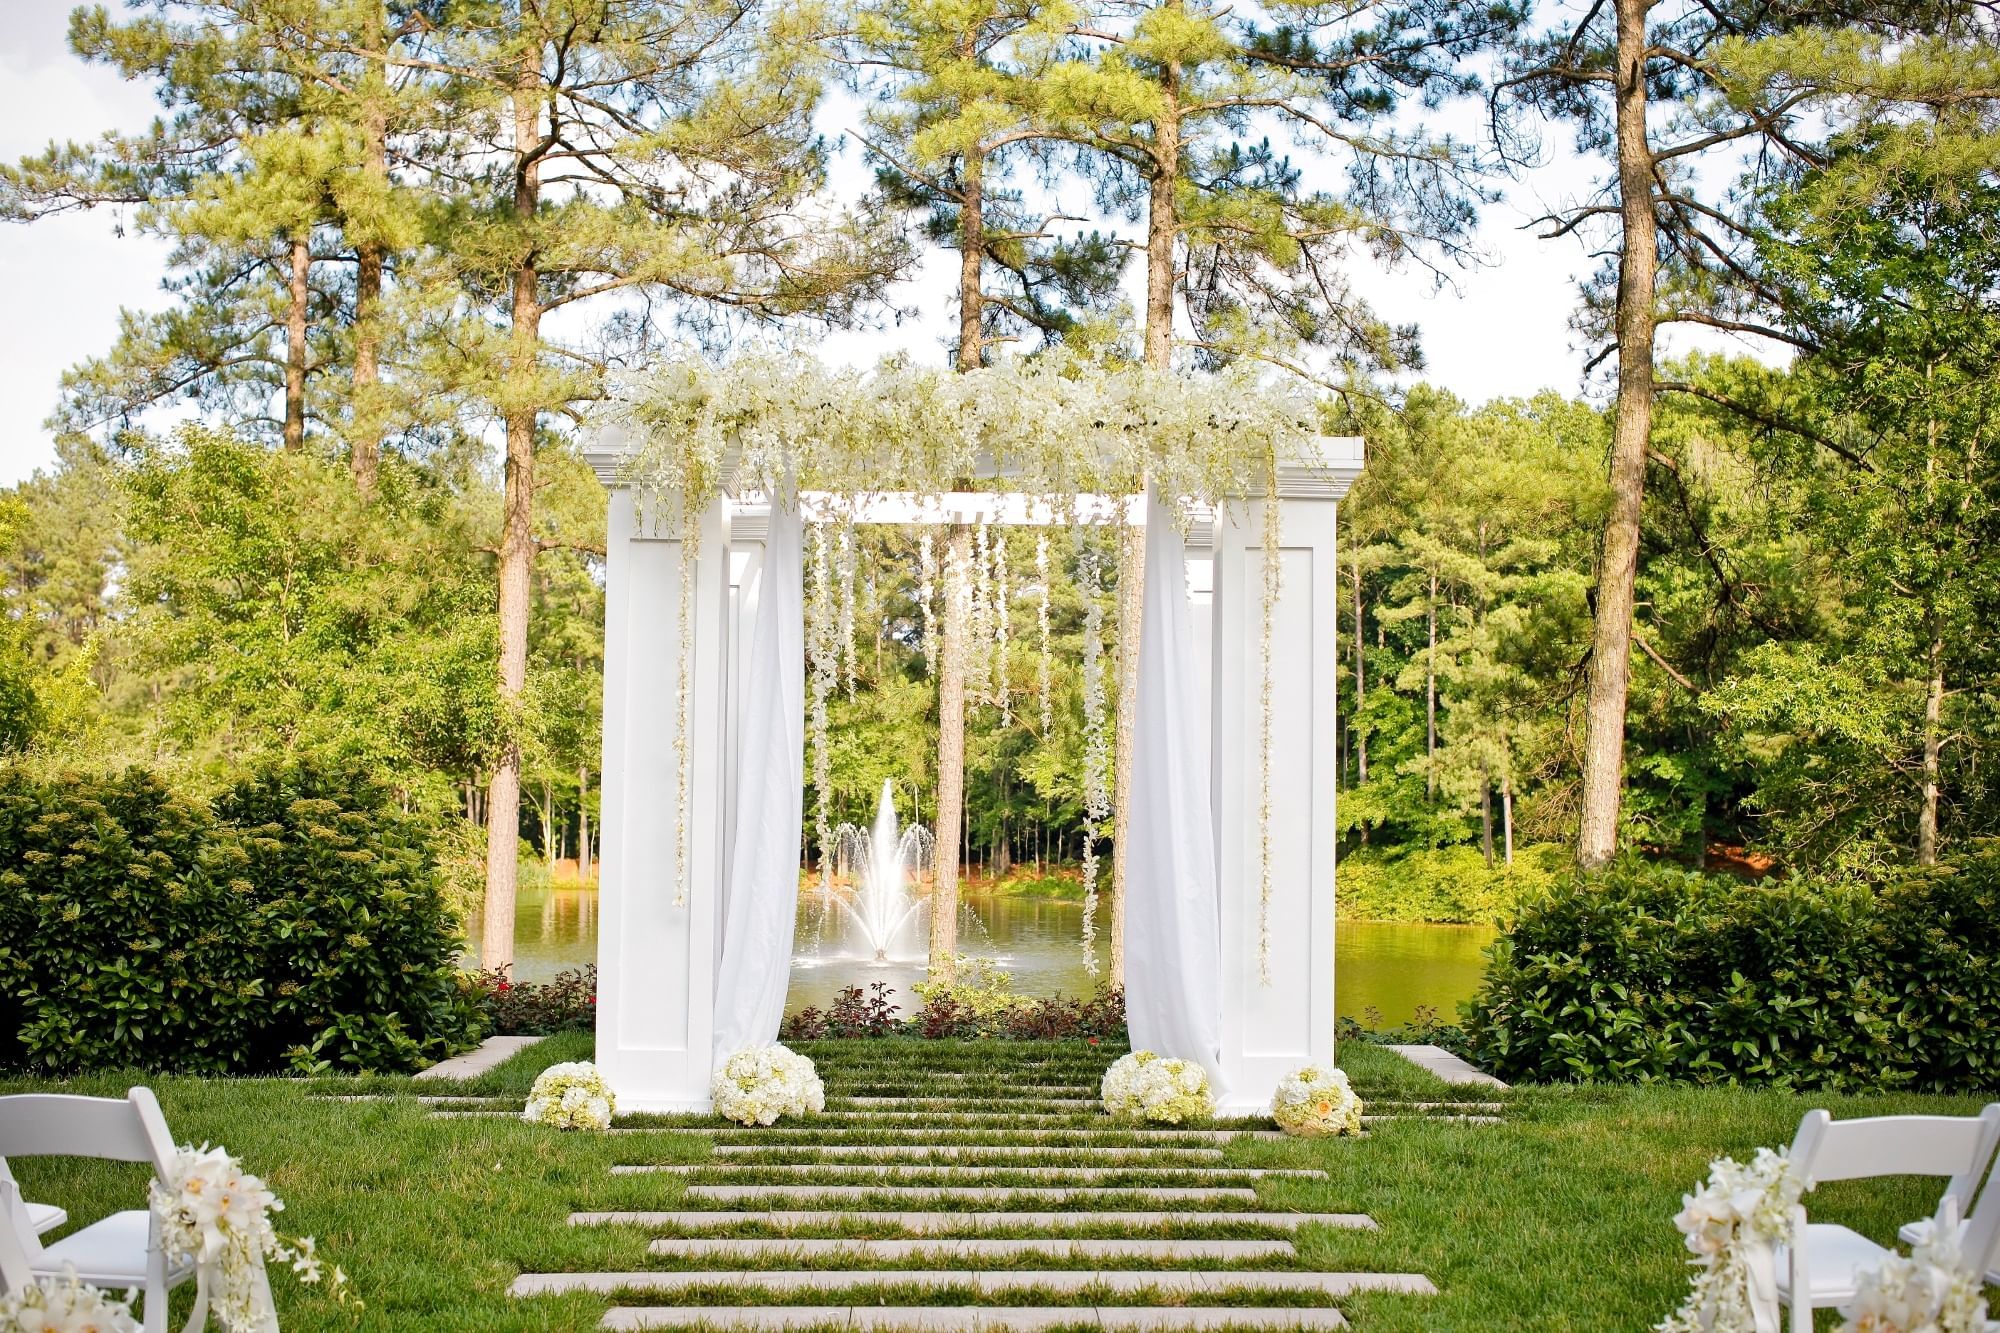 Outdoor wedding arch featuring white flowers in the Wedding Lawn at Umstead Hotel and Spa